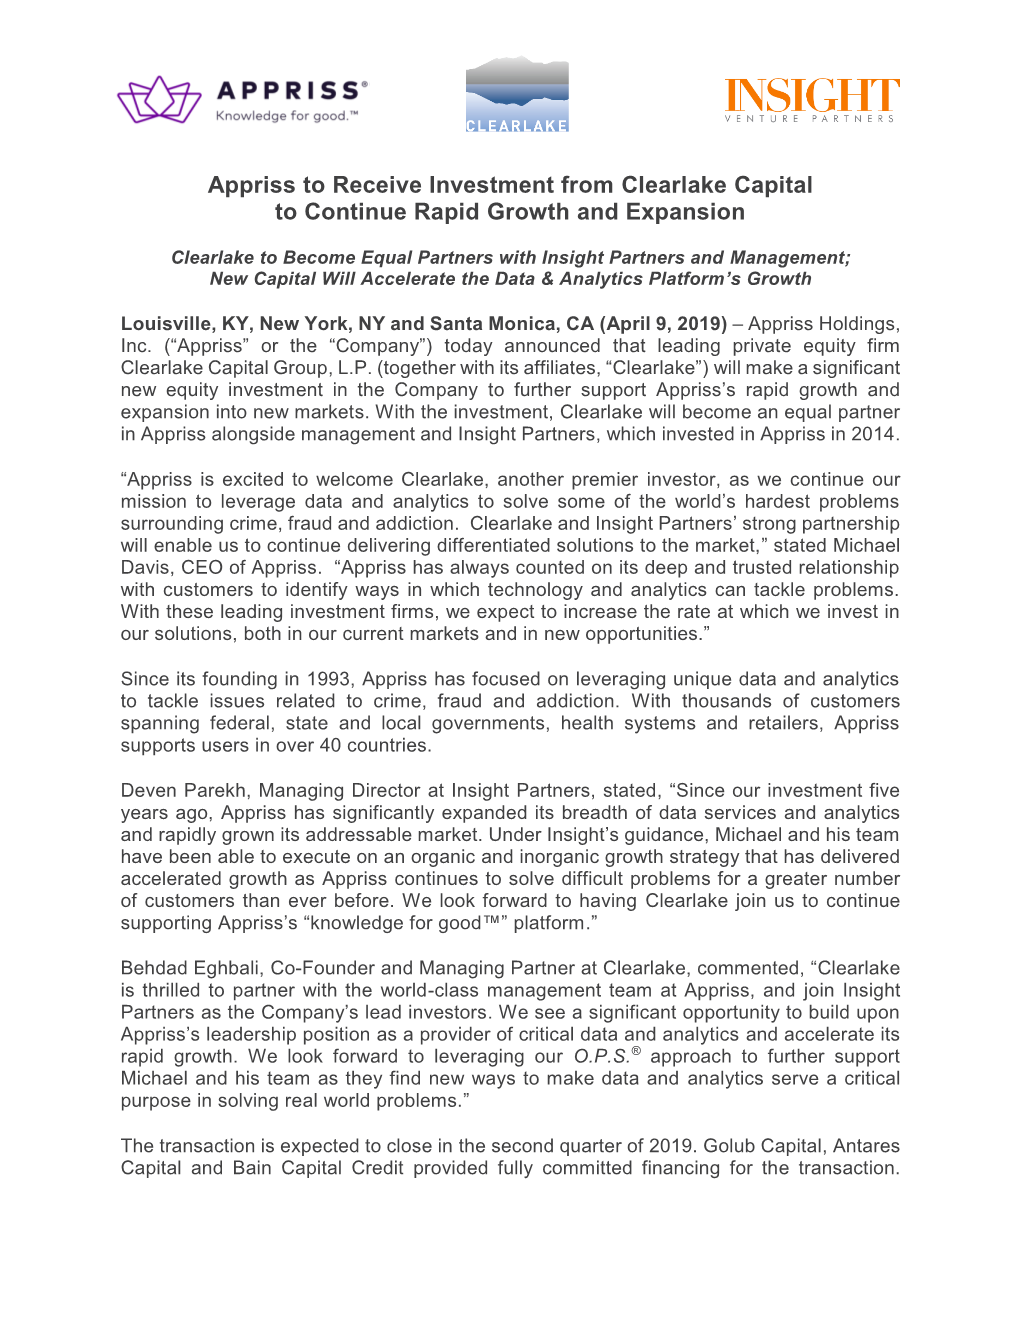 Appriss to Receive Investment from Clearlake Capital to Continue Rapid Growth and Expansion